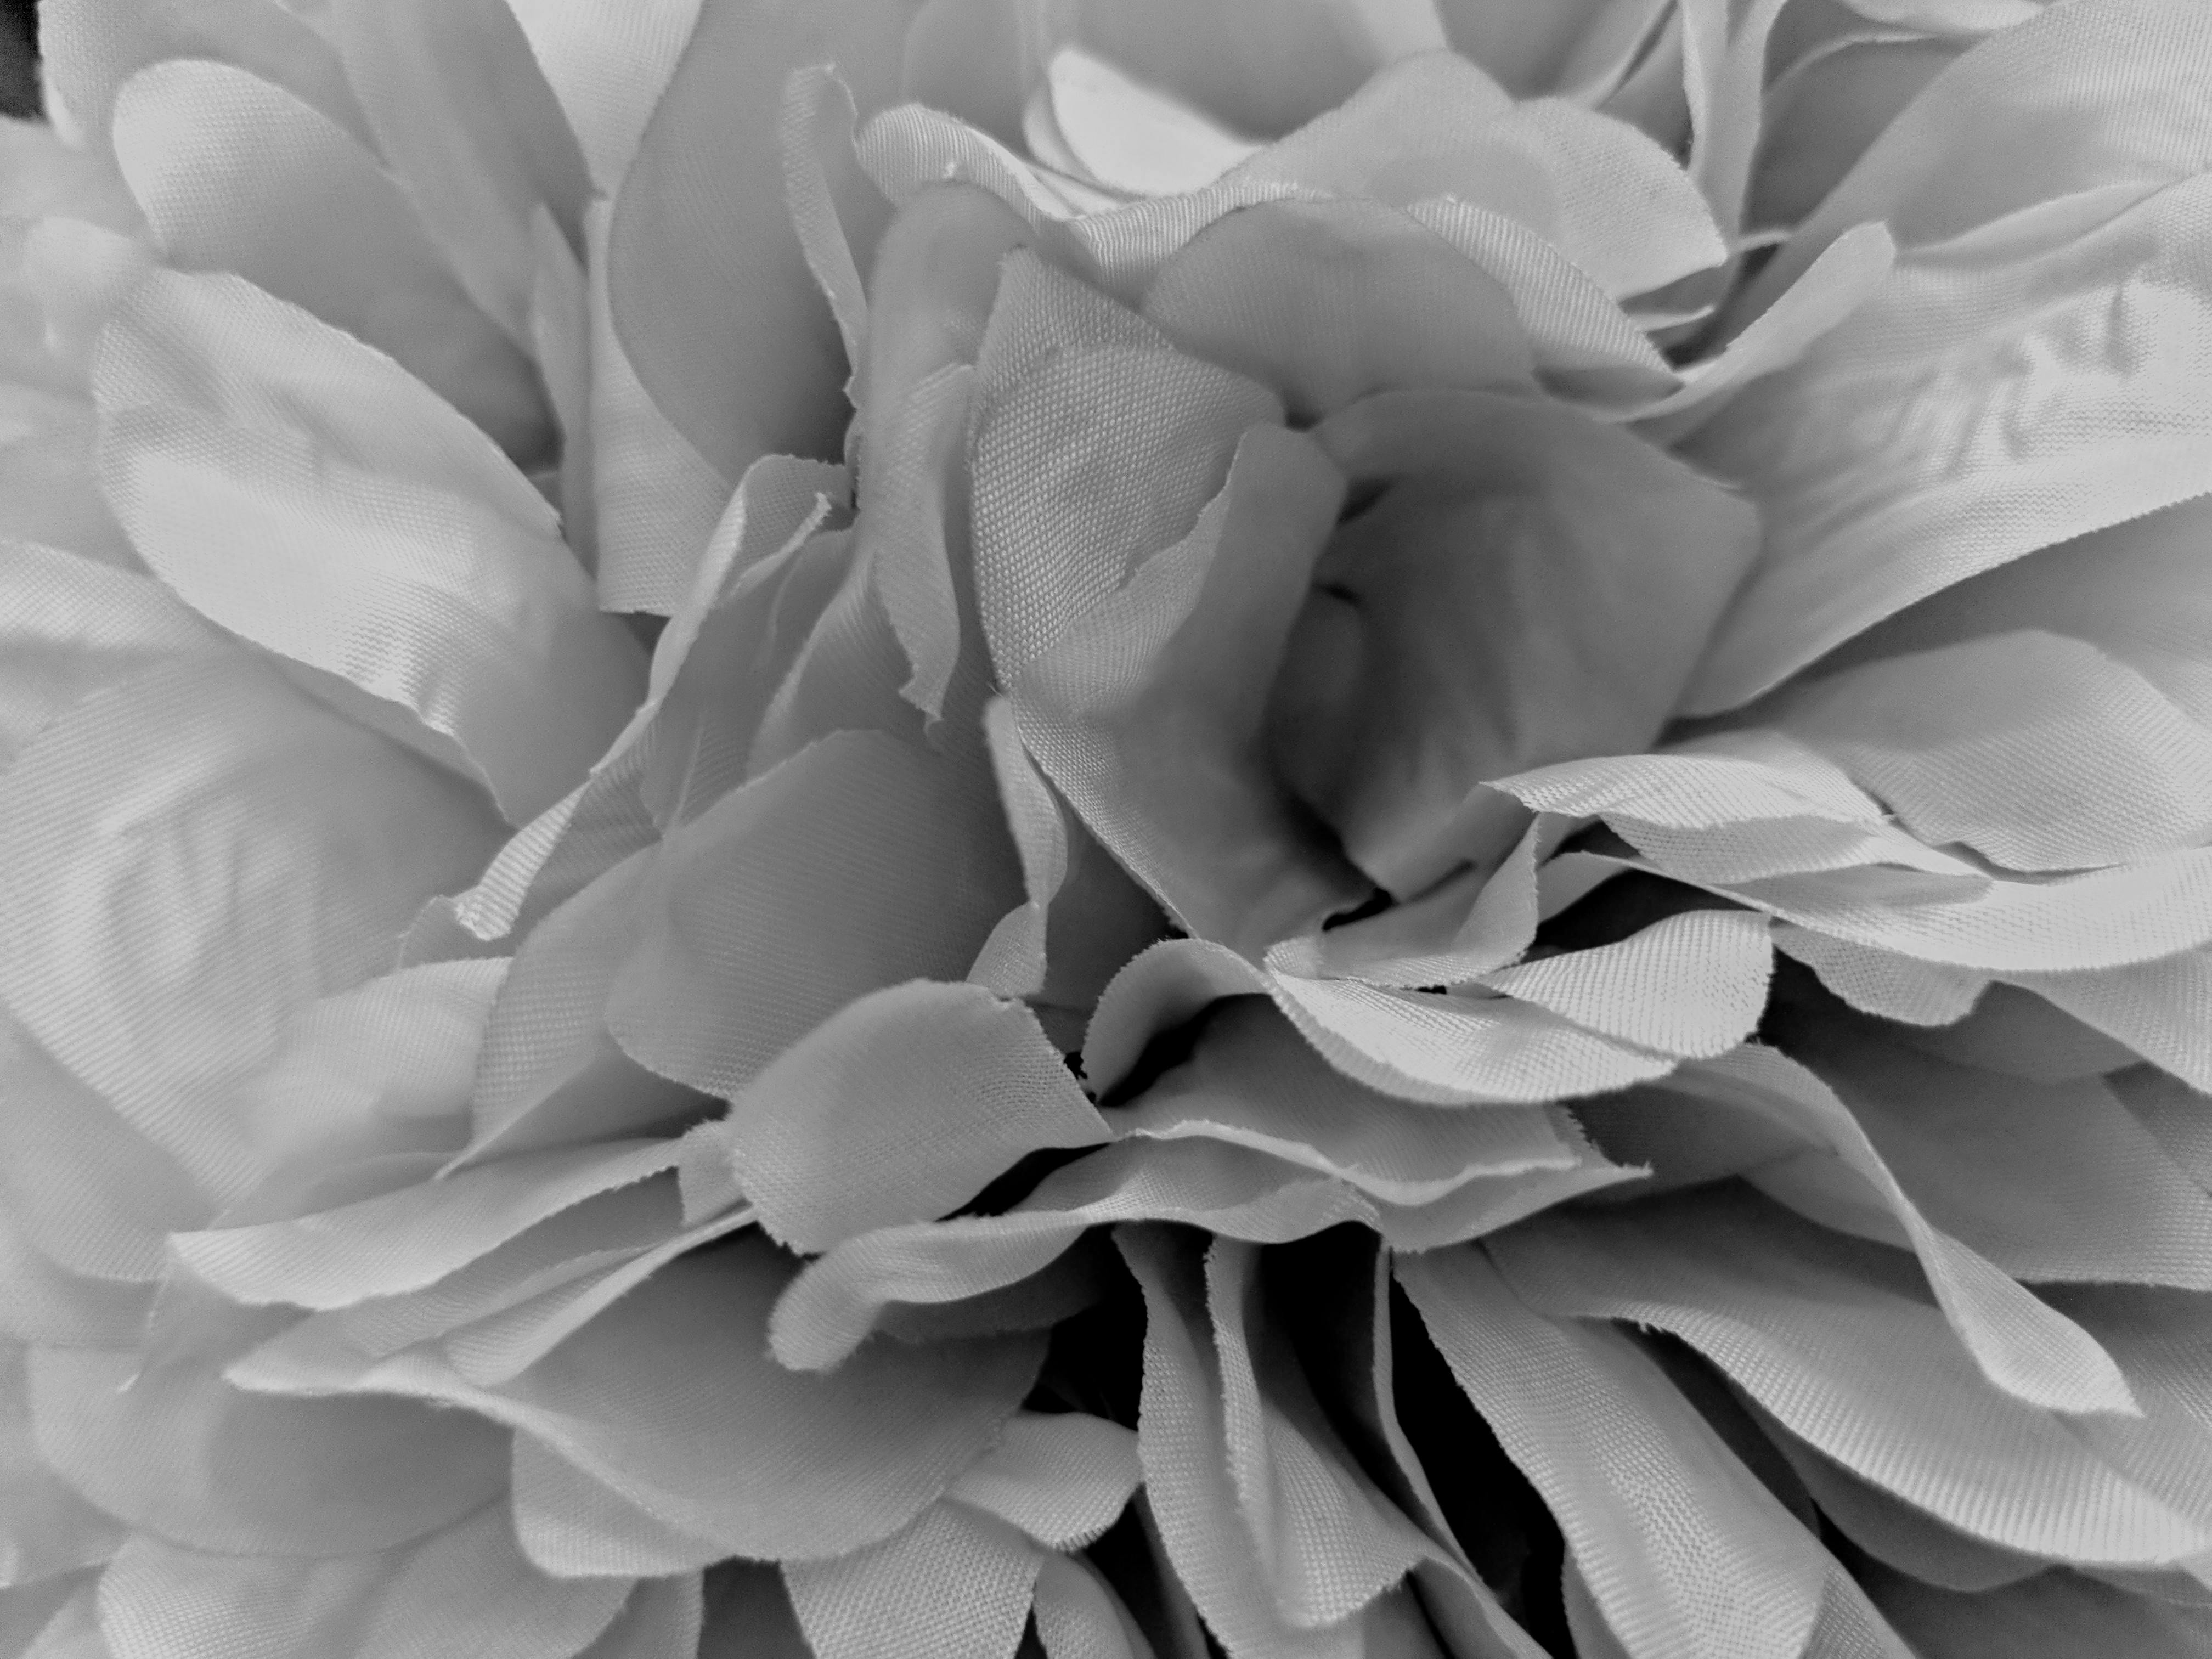 Free stock photo of Black and white flower, close up flower, flower art